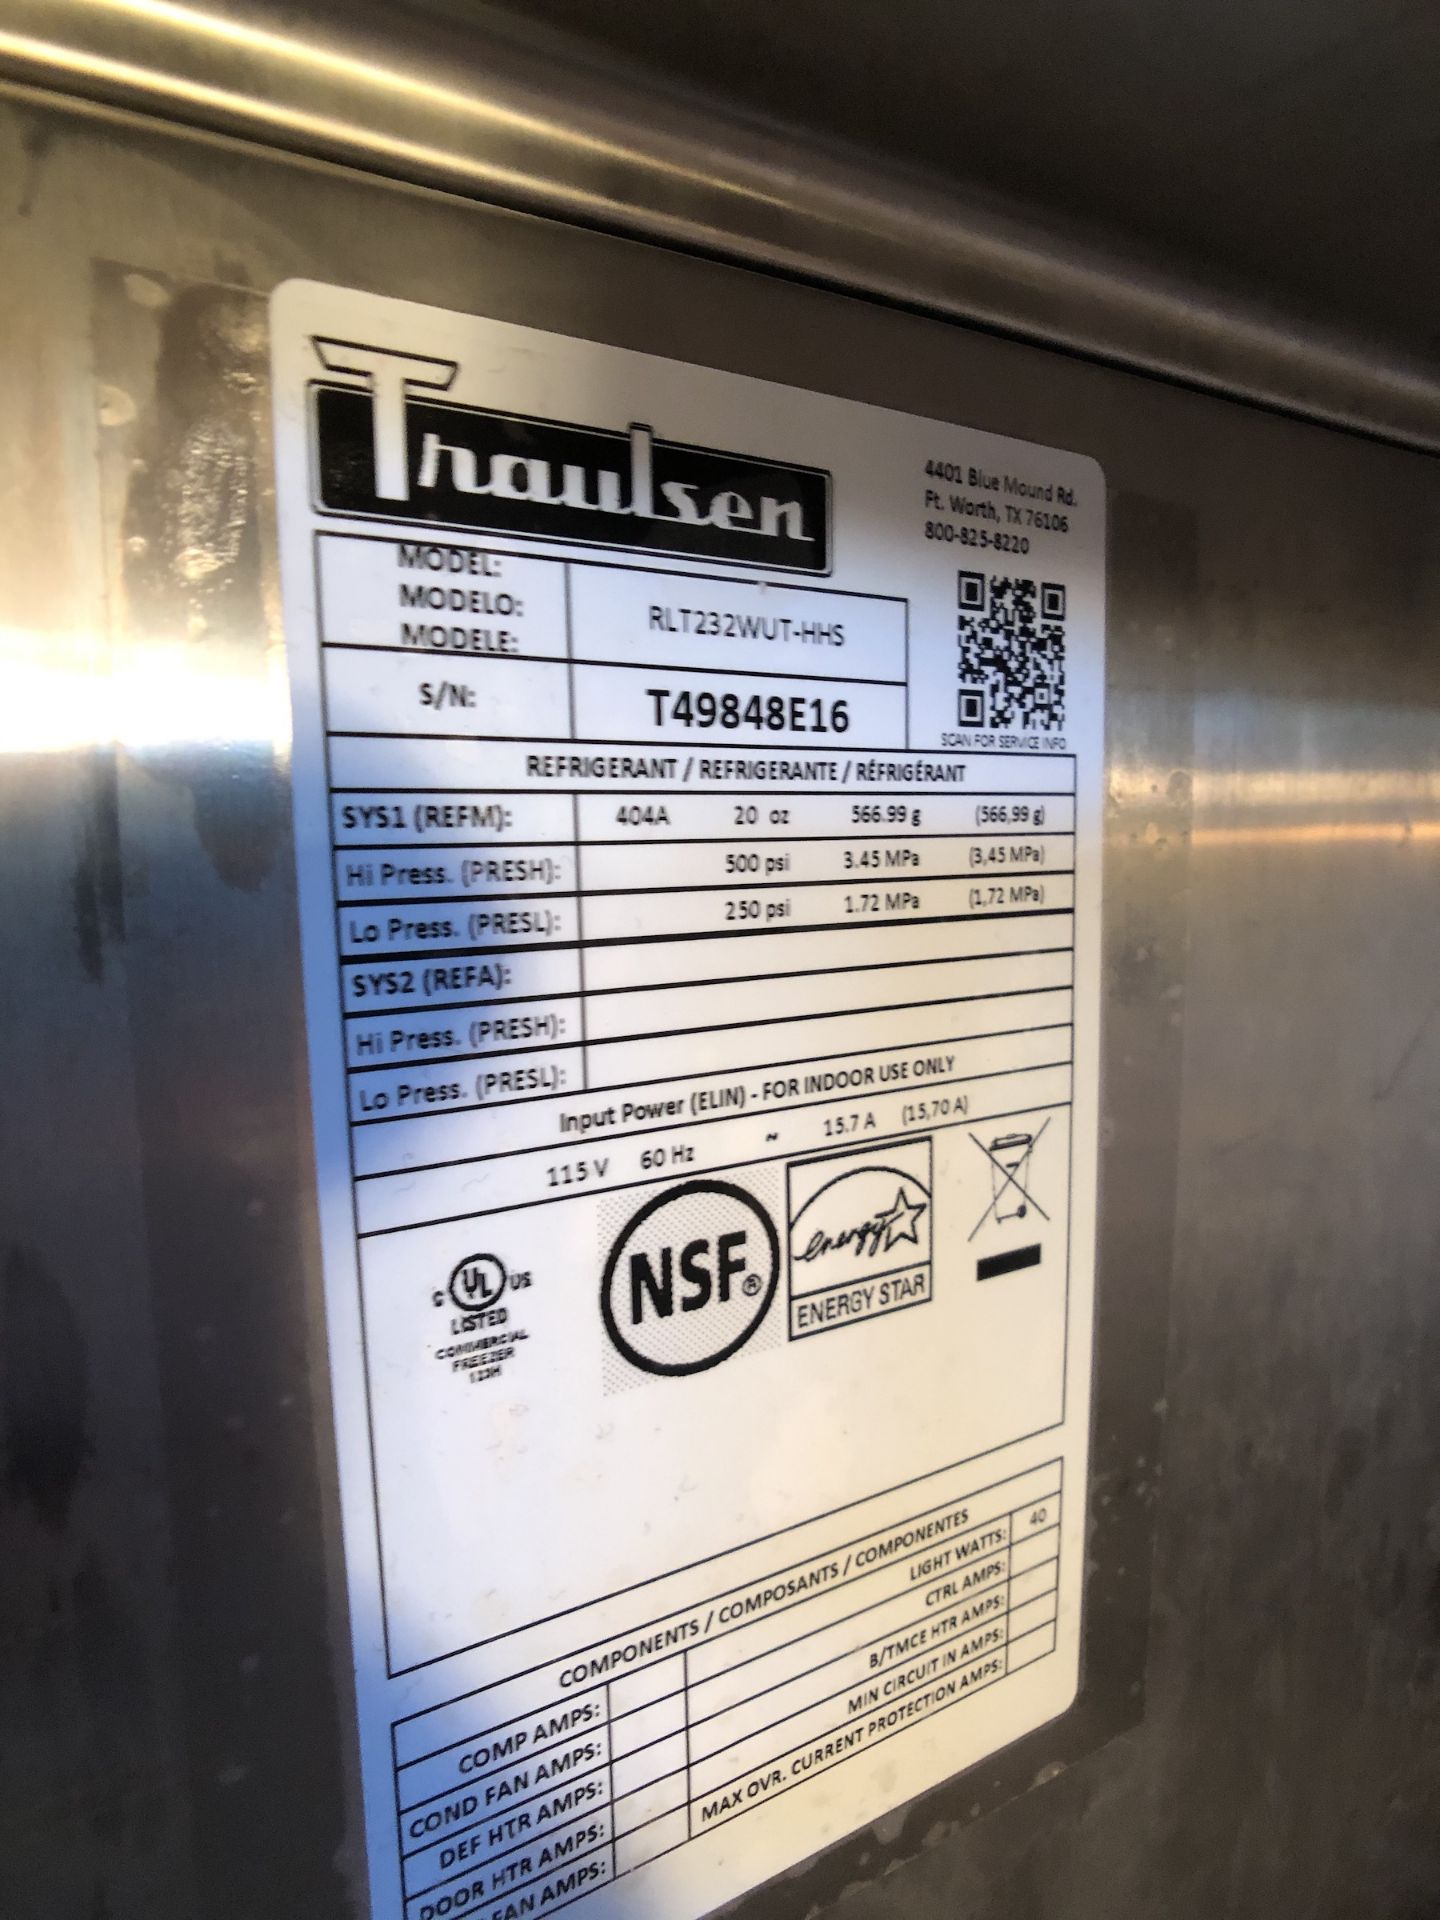 2016 TRAULSEN 4-COMPARTMENT S/S FREEZER, MODEL RLT232WUT-HHS, S/N T49848E16 (BUILT IN MARCH 2016) - Image 2 of 4